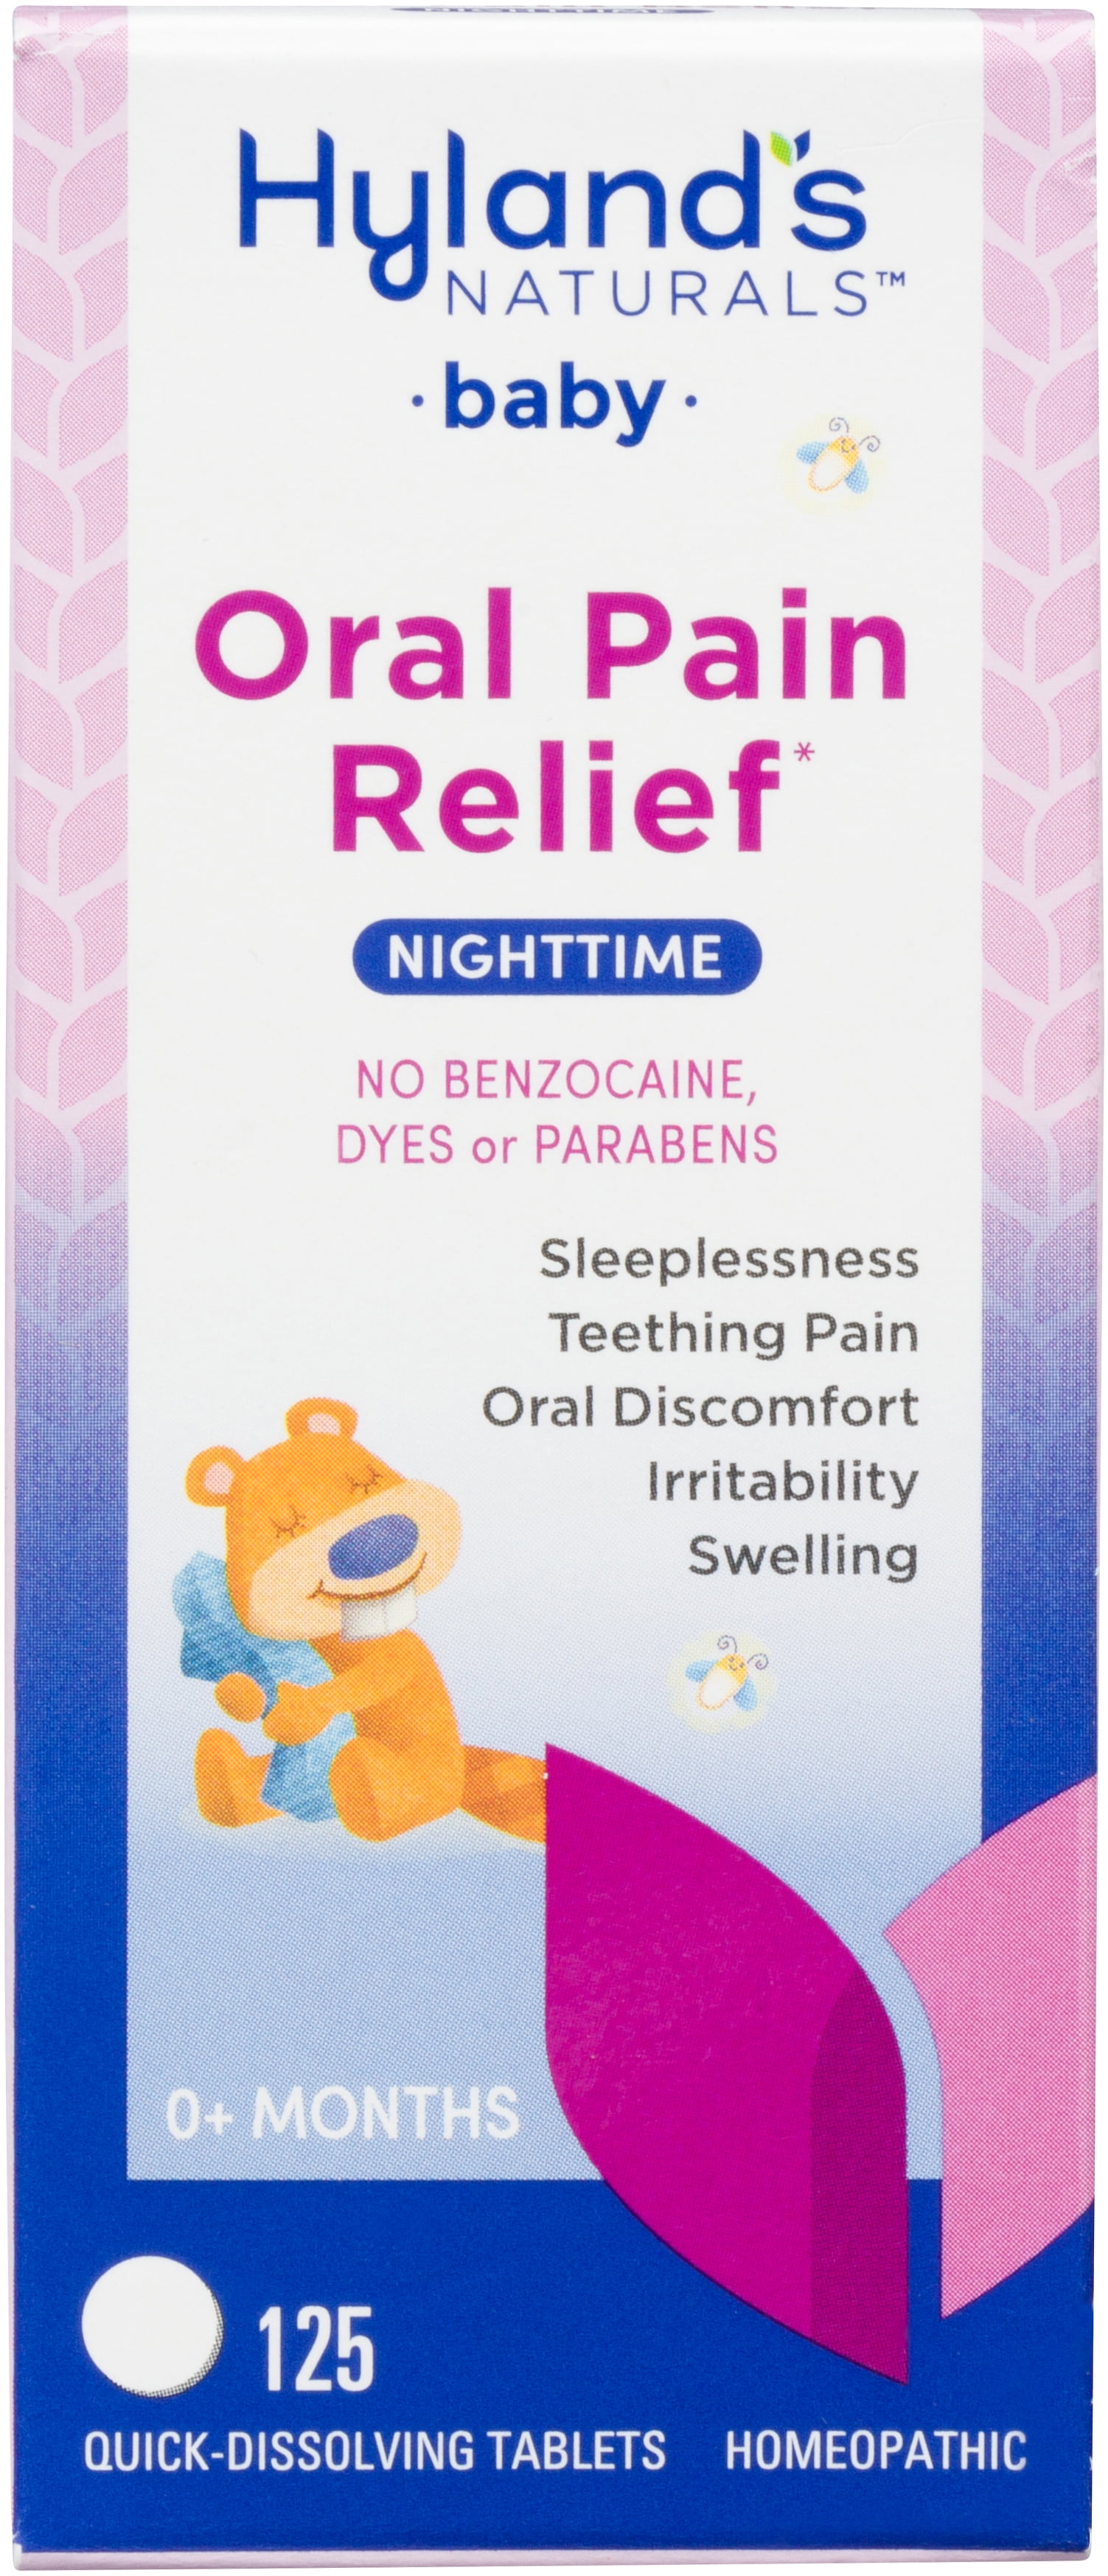 Hyland's Naturals Baby Nighttime Oral Pain Relief, 125 Tablets, Mini Pack